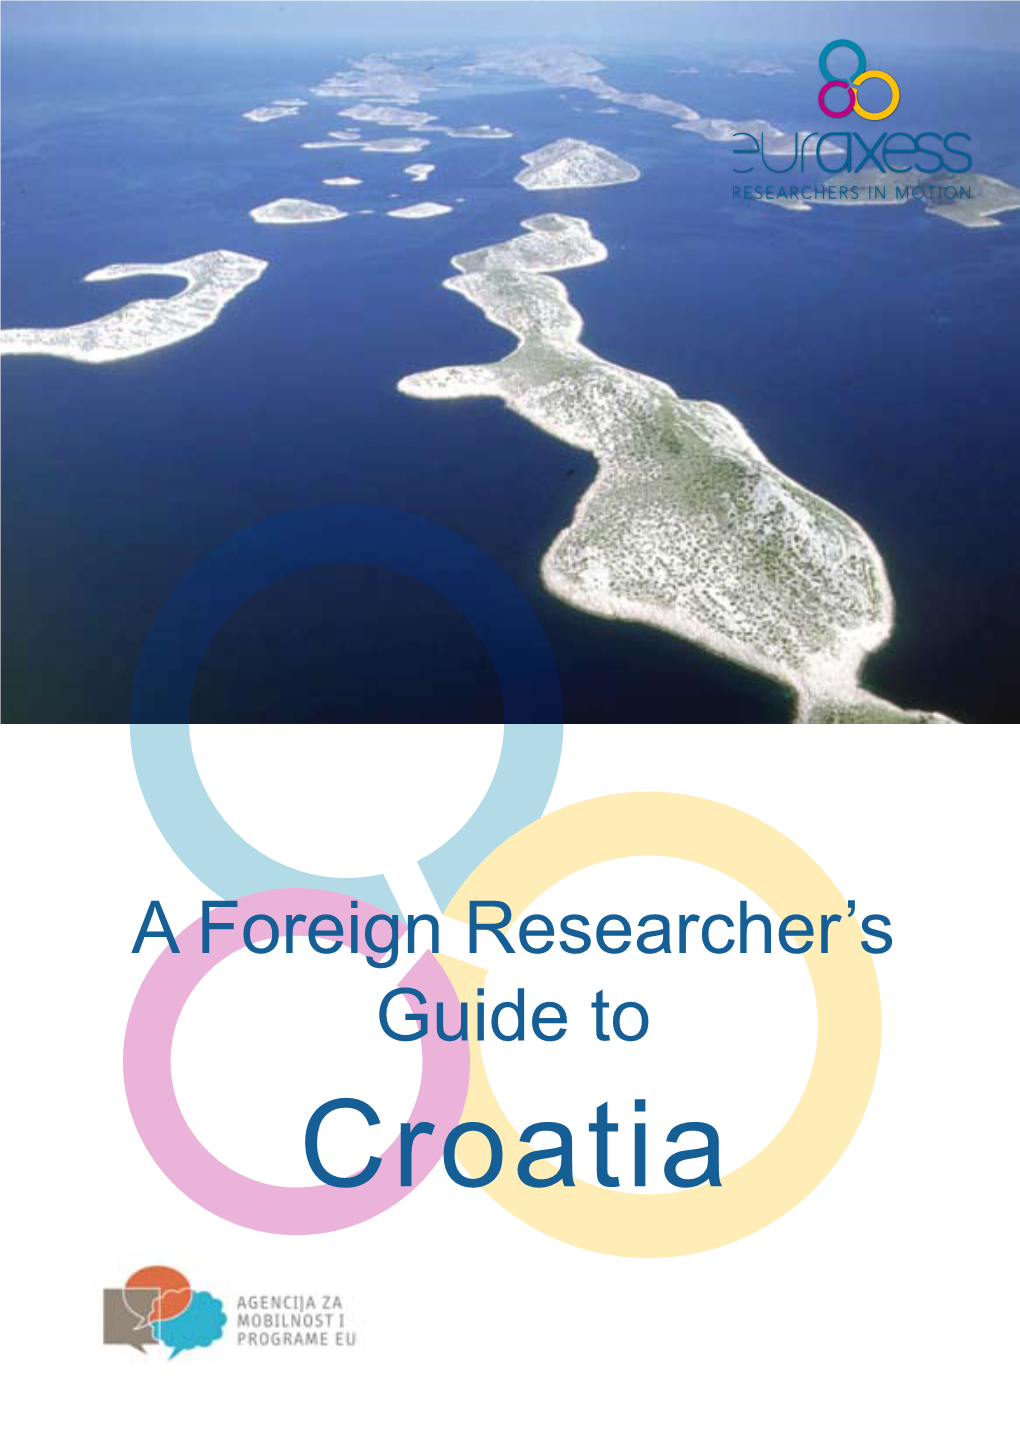 A Foreign Researcher's Guide to Croatia